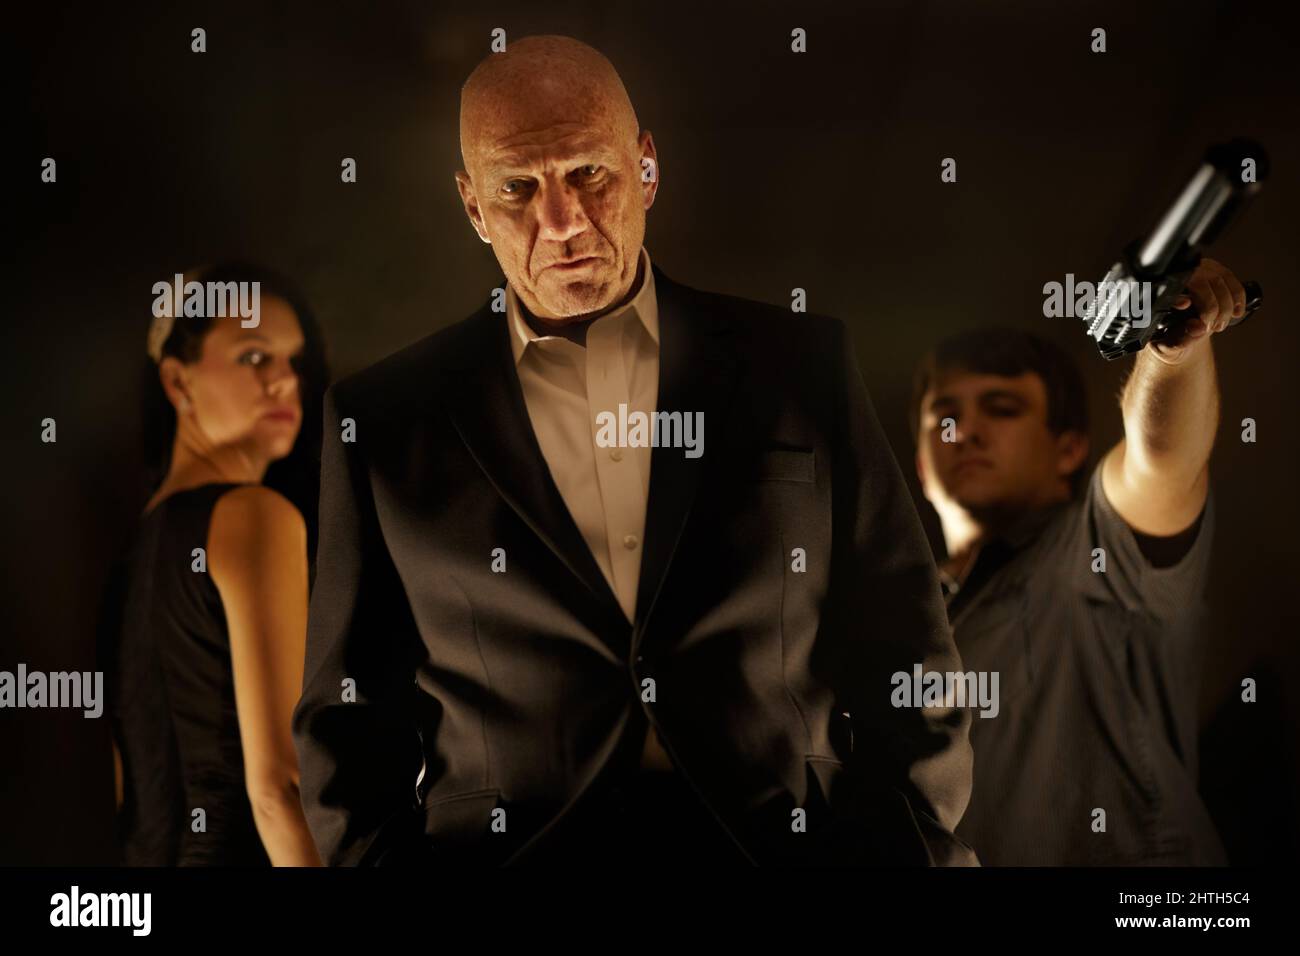 Crime is his game. Mob boss looking serious with his team standing behind him. Stock Photo